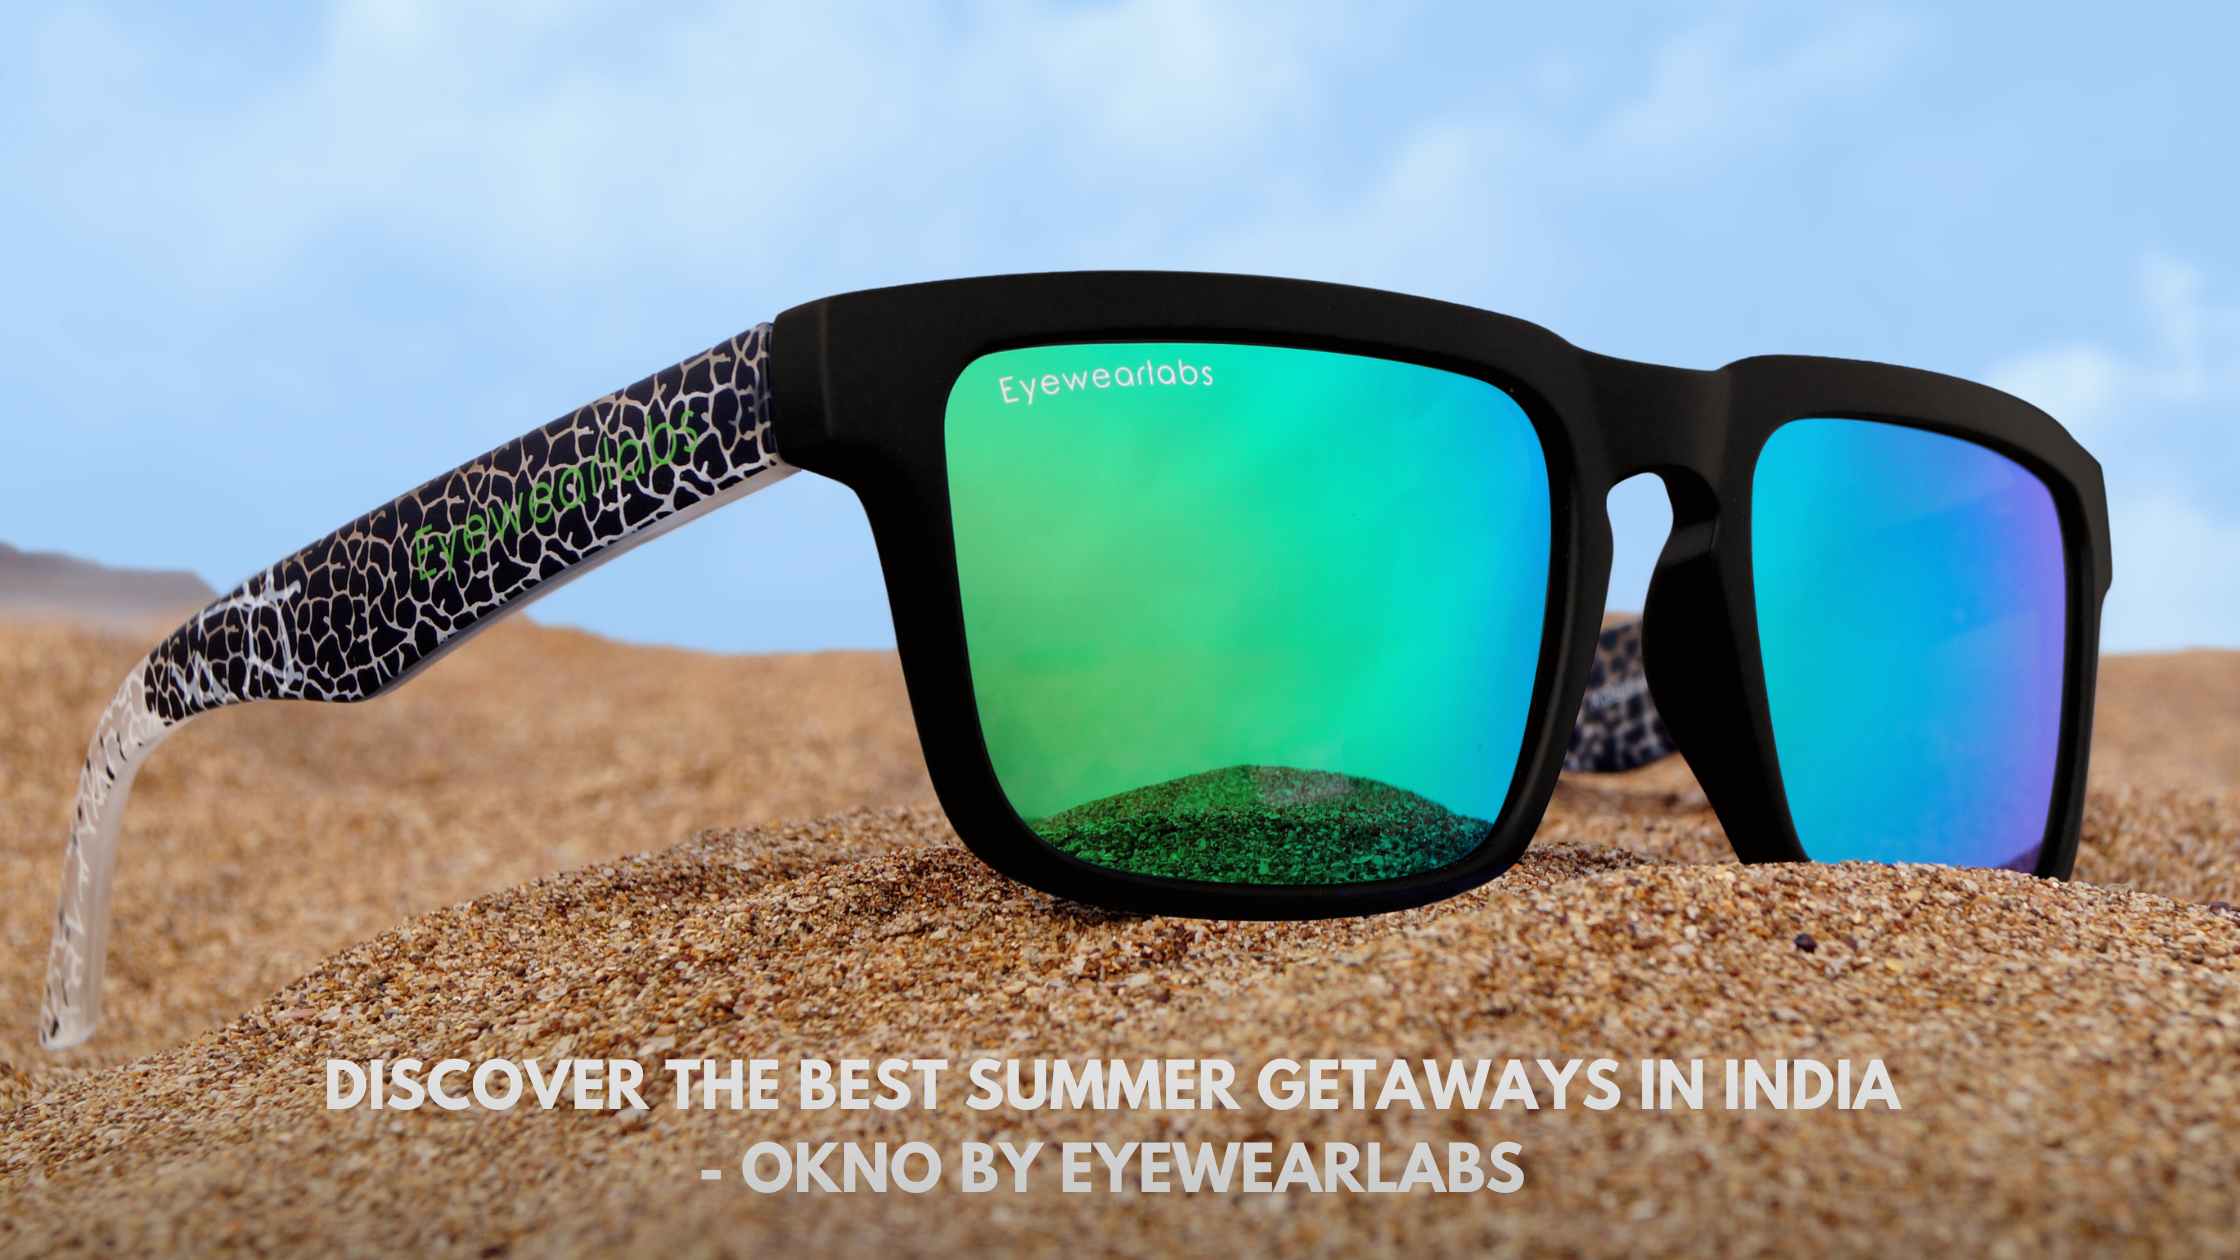 Discover the Best Summer Getaways in India-OKNO by Eyewearlabs